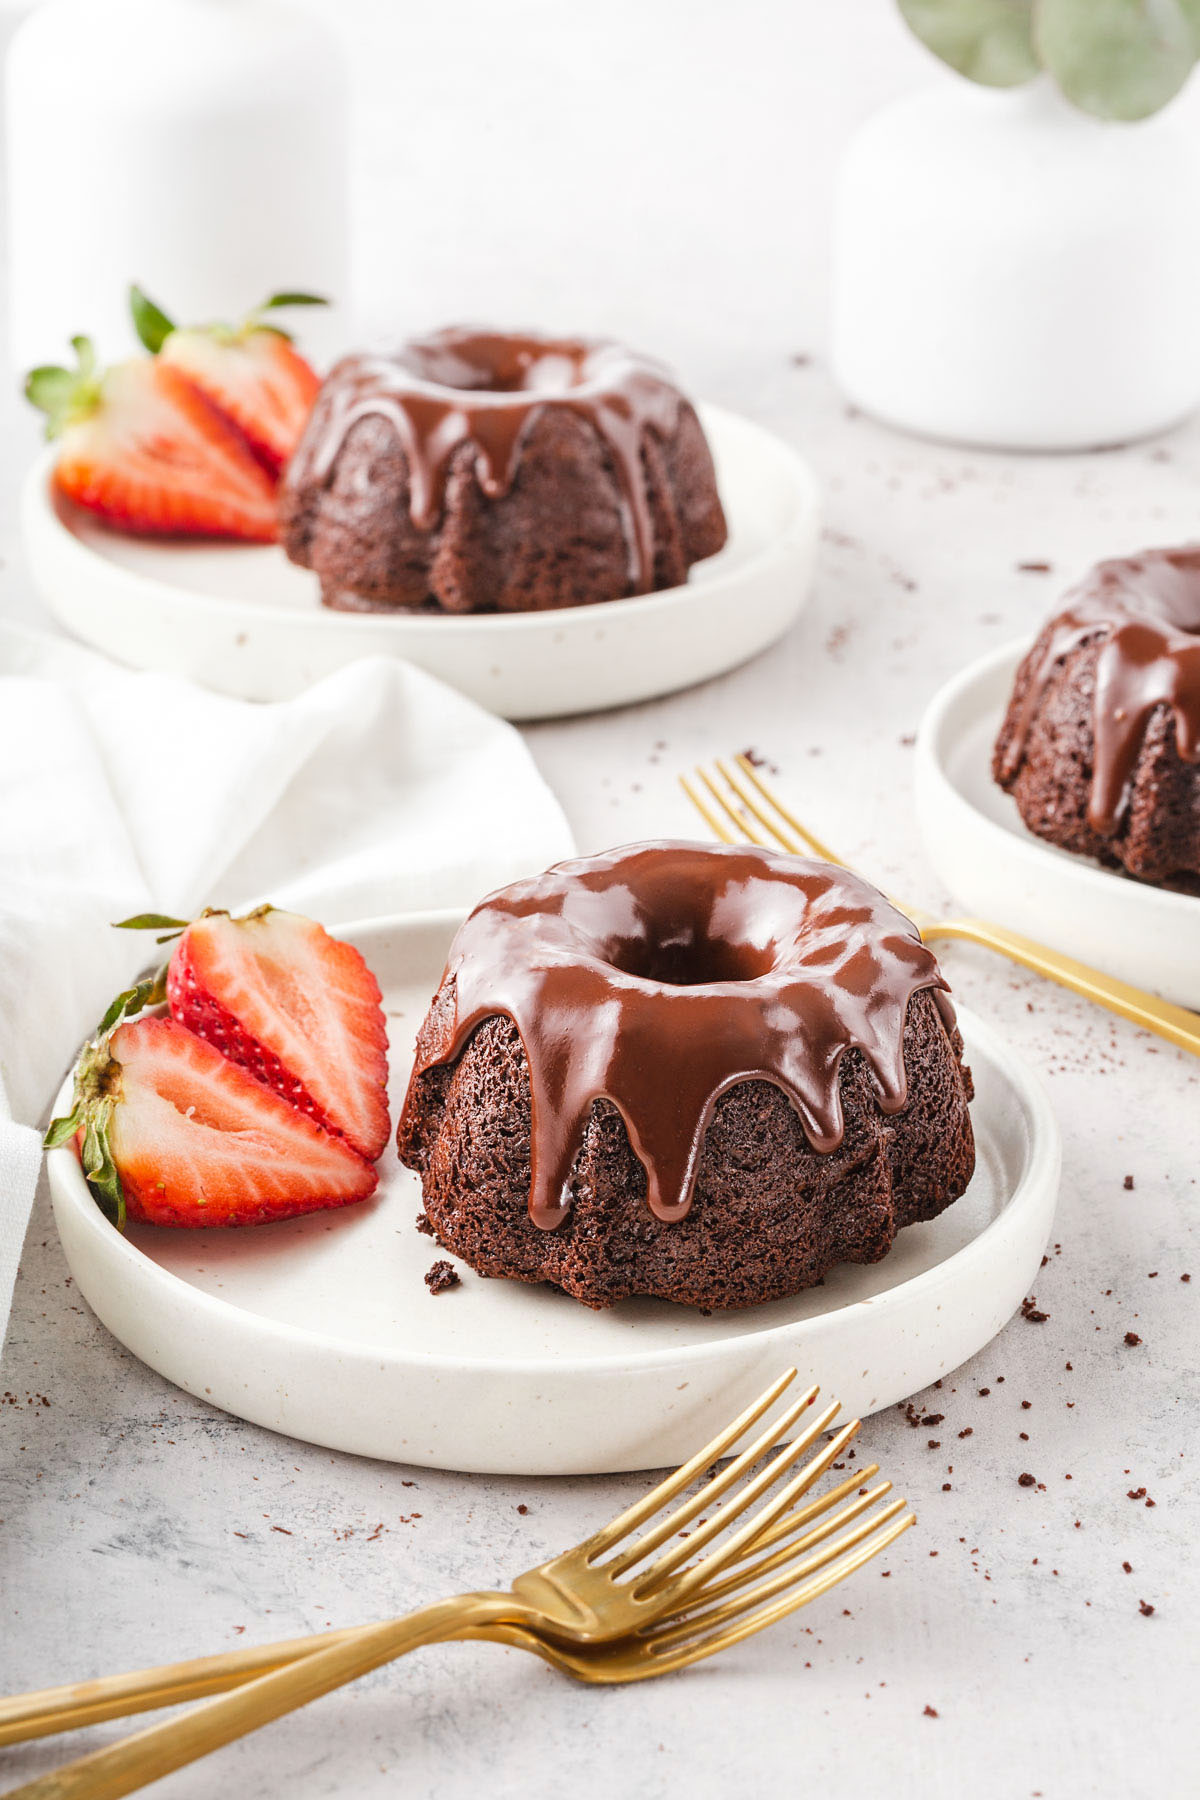 https://takestwoeggs.com/wp-content/uploads/2021/04/Chocolate-mini-bundt-cakes-with-chocolate-ganache-takes-two-eggs-easy-asian-fusion-recipes-2.jpg